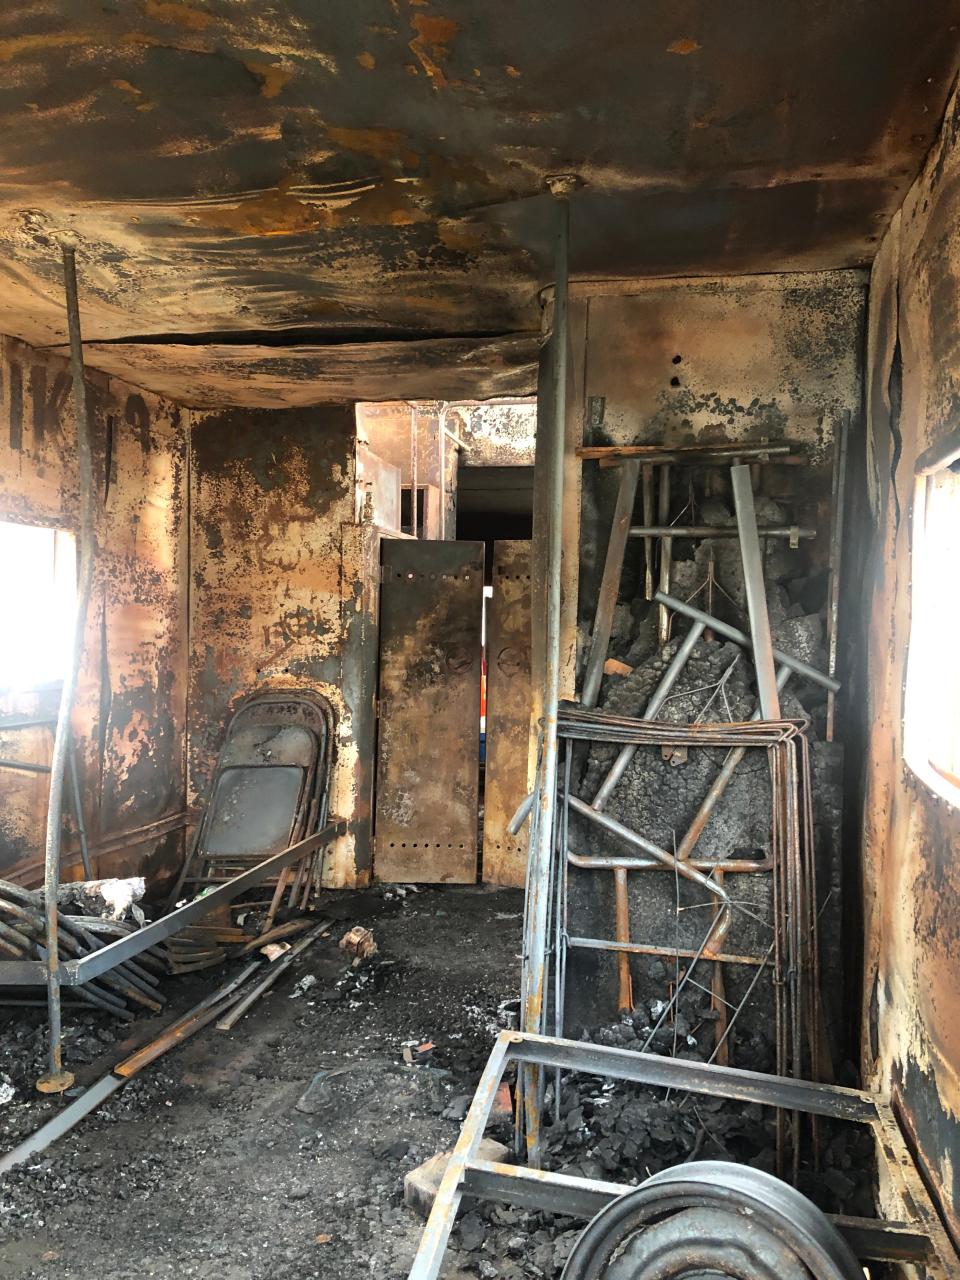 A fire in February 2023 badly damaged the inside of the red Main Street Caboose in downtown Alliance. Picture of the interior shown here on April 5, 2023.